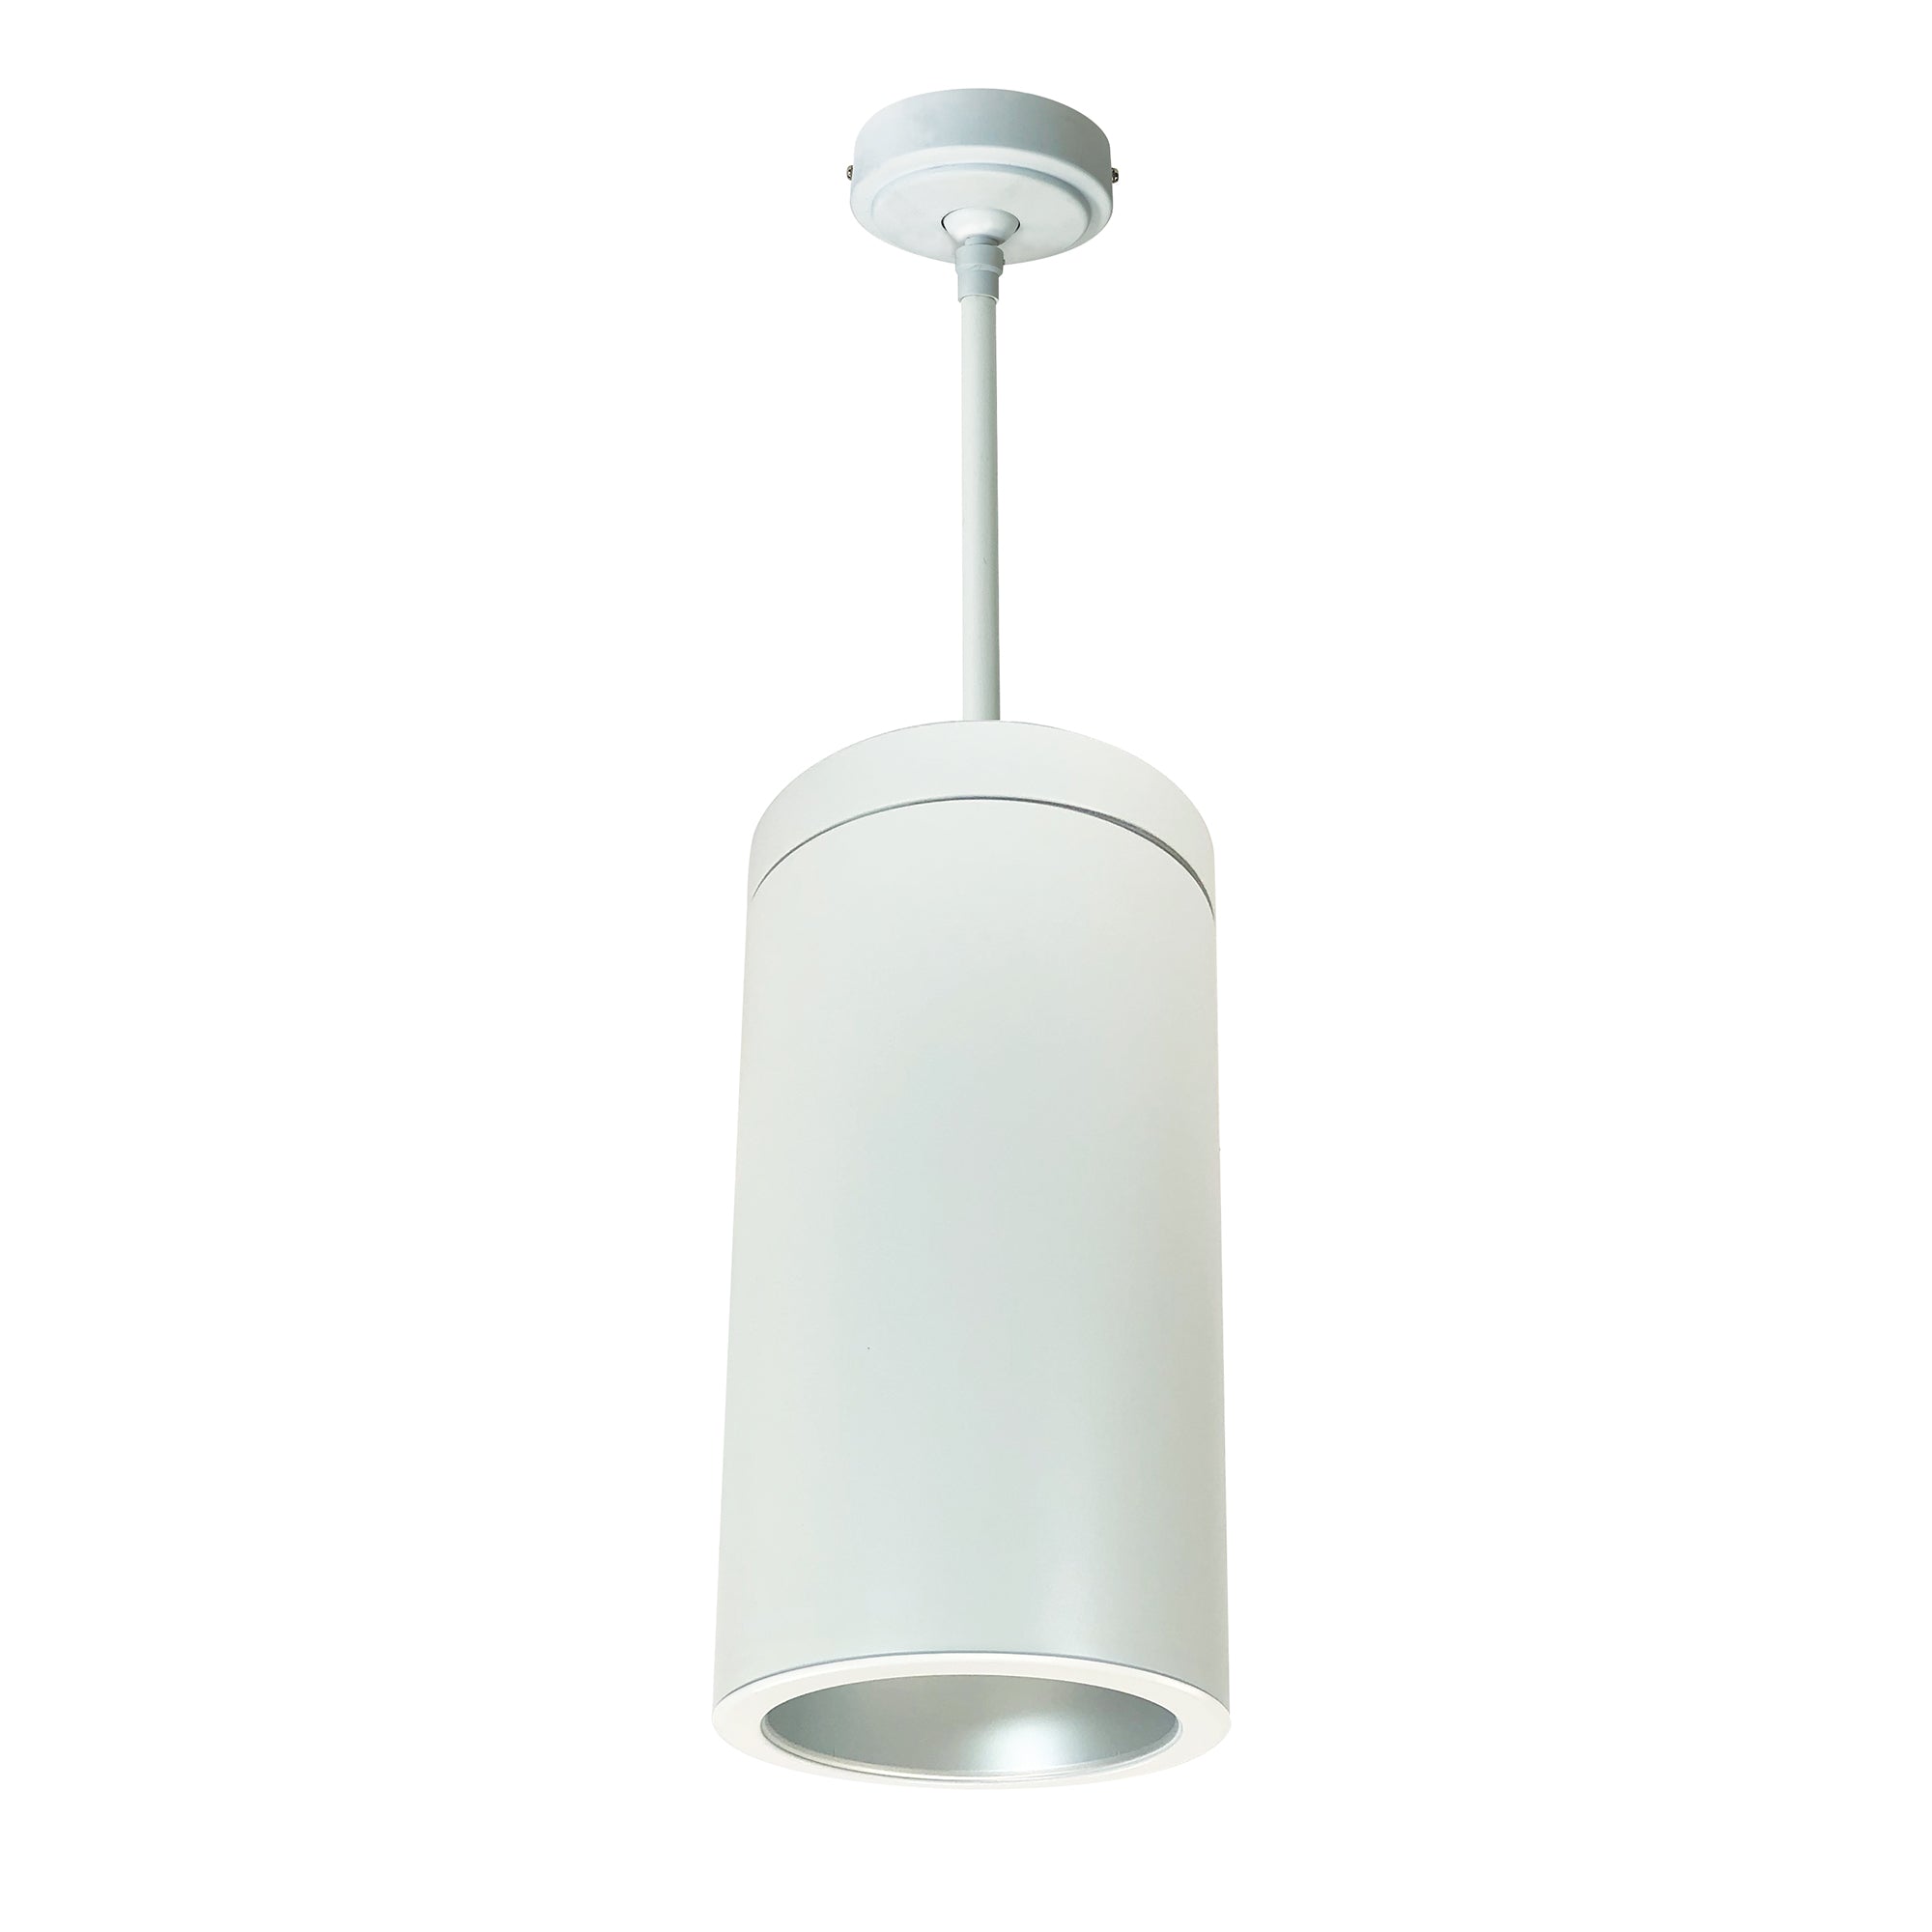 Nora Lighting LE45 - NYLS2-6P35130FHWW3